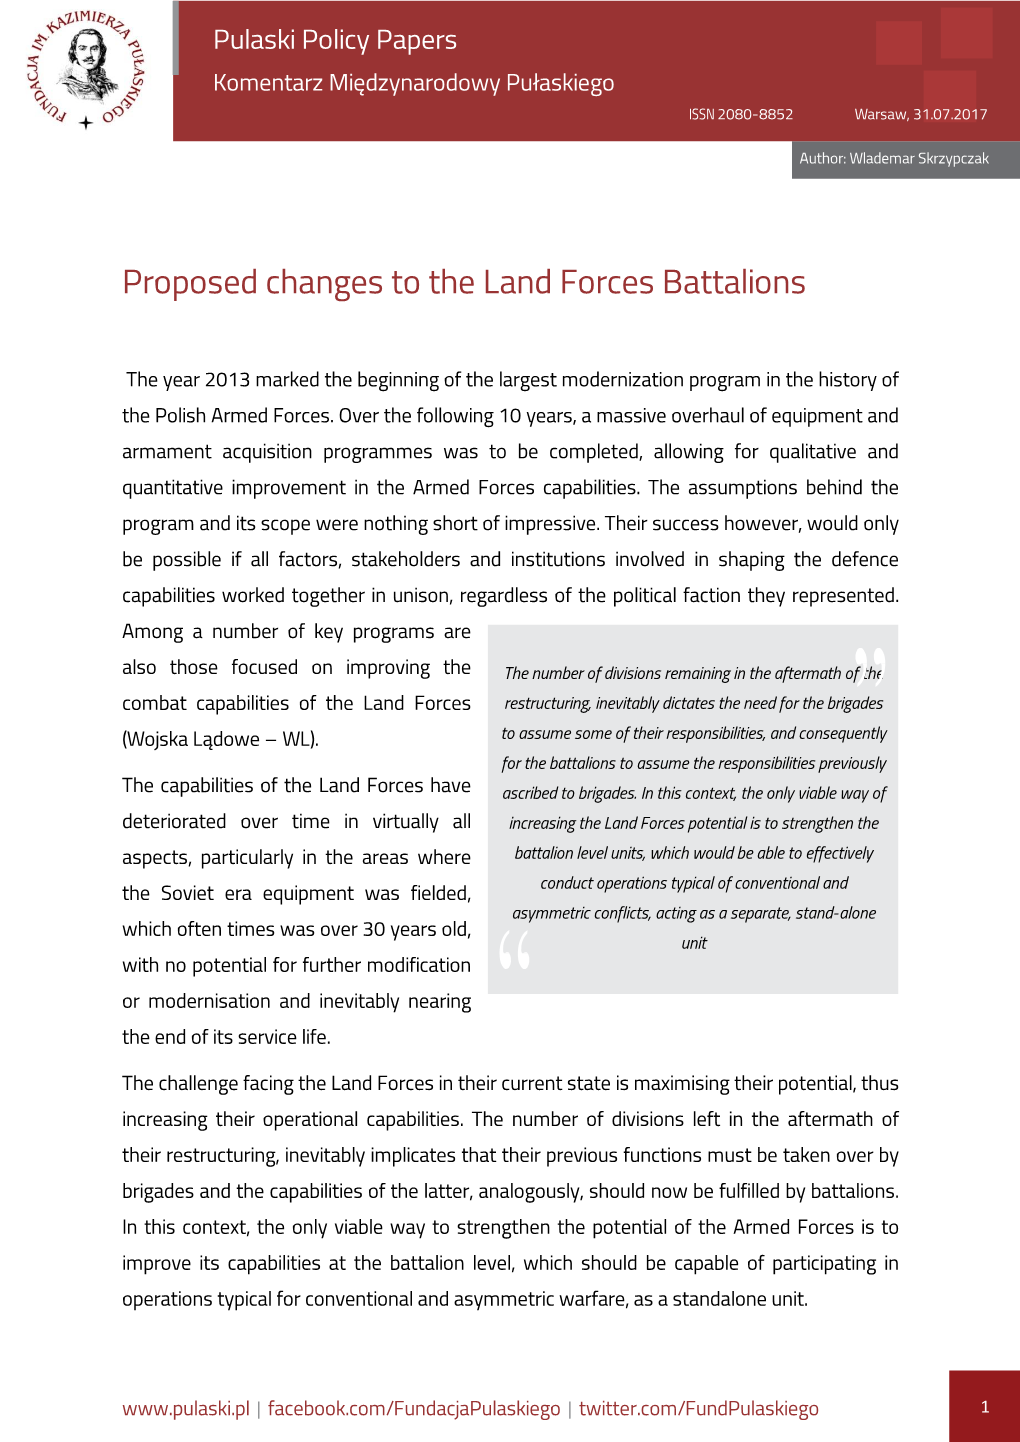 Proposed Changes to the Land Forces Battalions